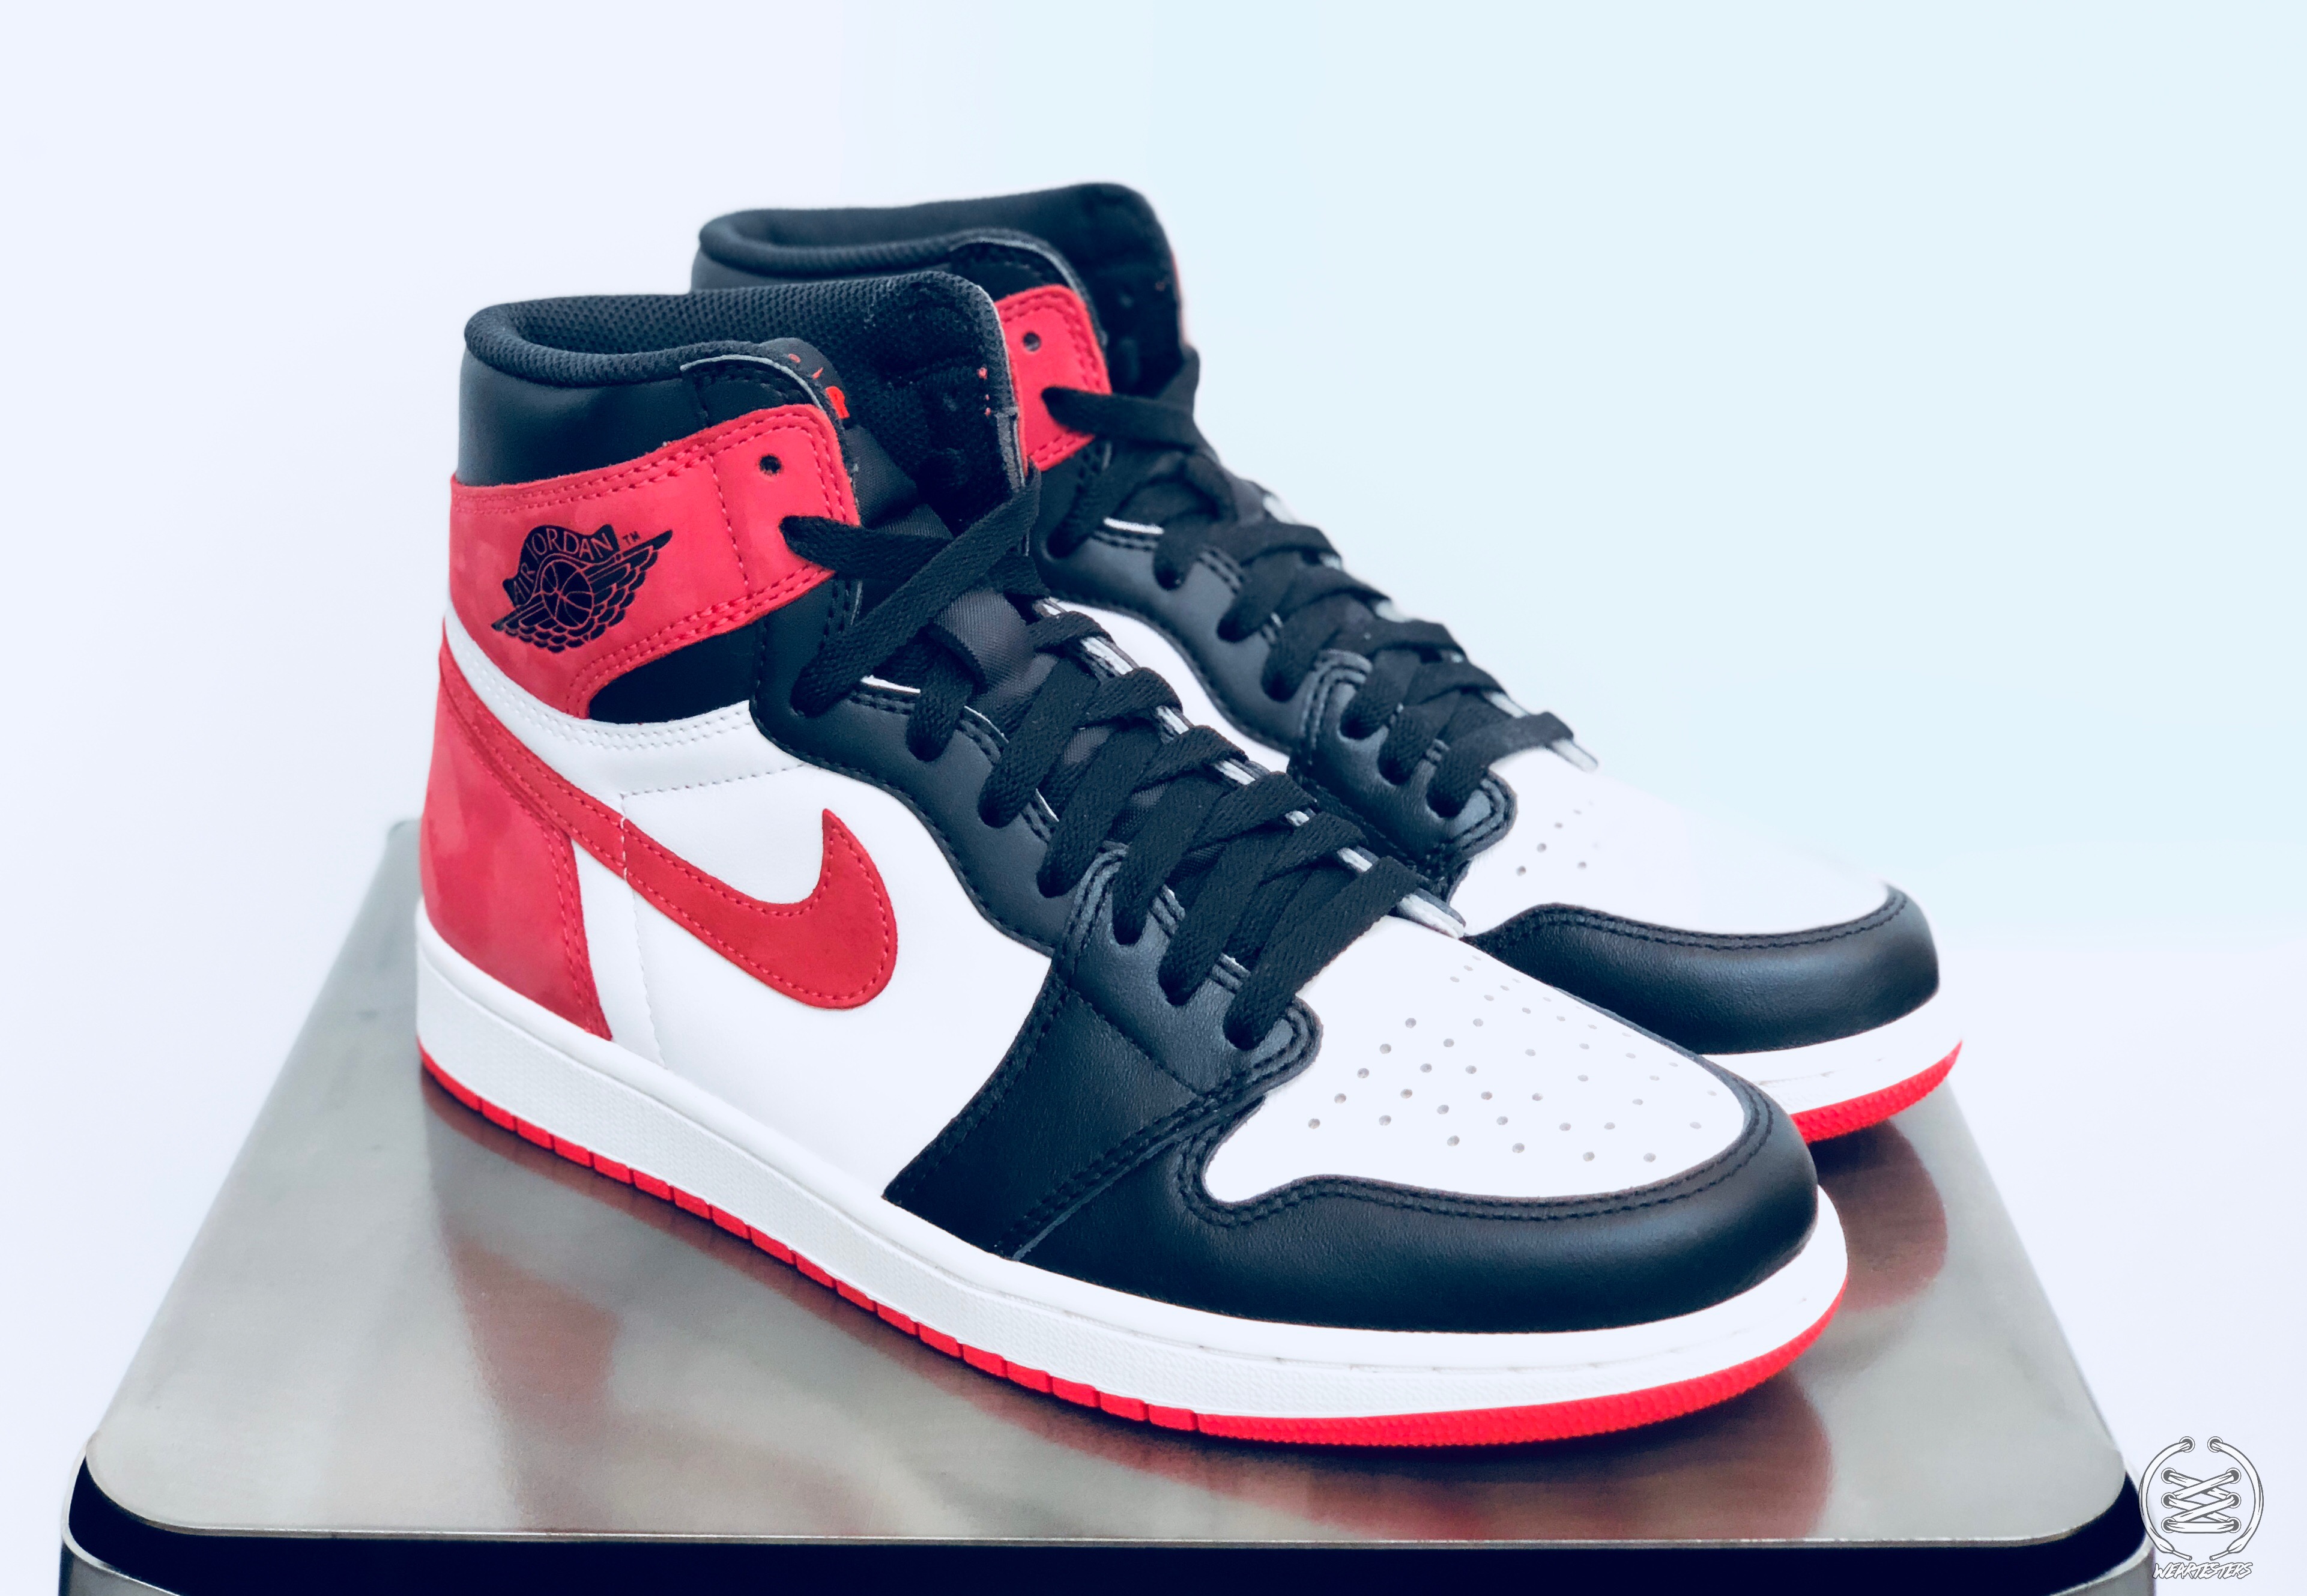 Air Jordan 1 Track Red Best Hand in the Game collection 4